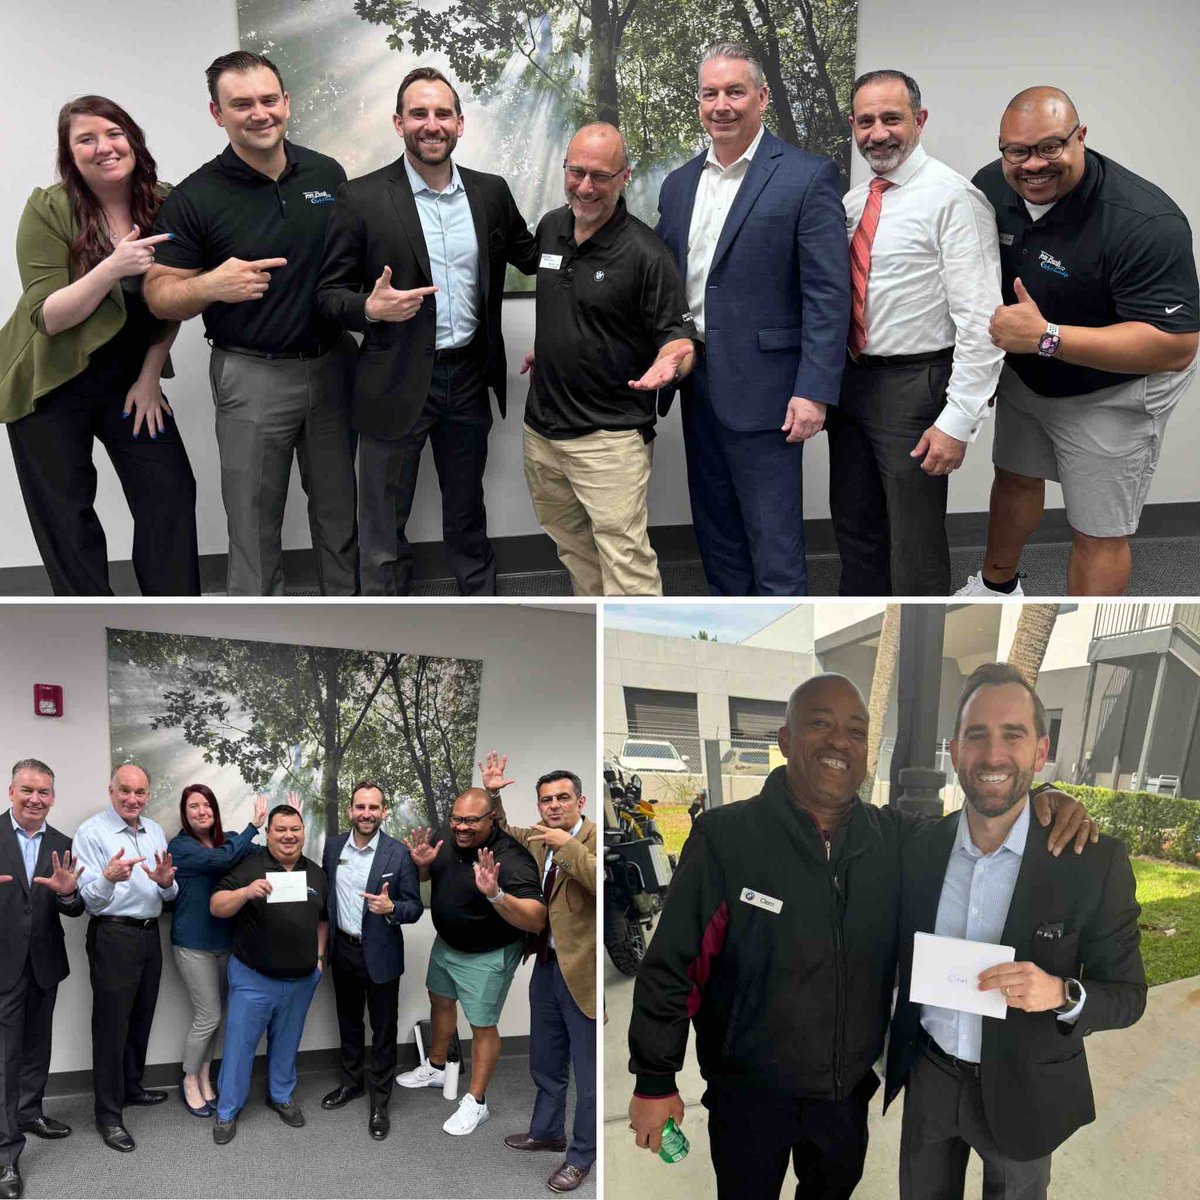 Join us in congratulating these employees on their major anniversary milestones:
🚗 Parts Manager David Levin = 20 years (employee #1)
🚙 Service Manager James Latham = 10 years
🚗 Service Advisor Clem Myles = 5 years

#TomBushAnniversaries #JaxBimmers #BestPlacesToWork